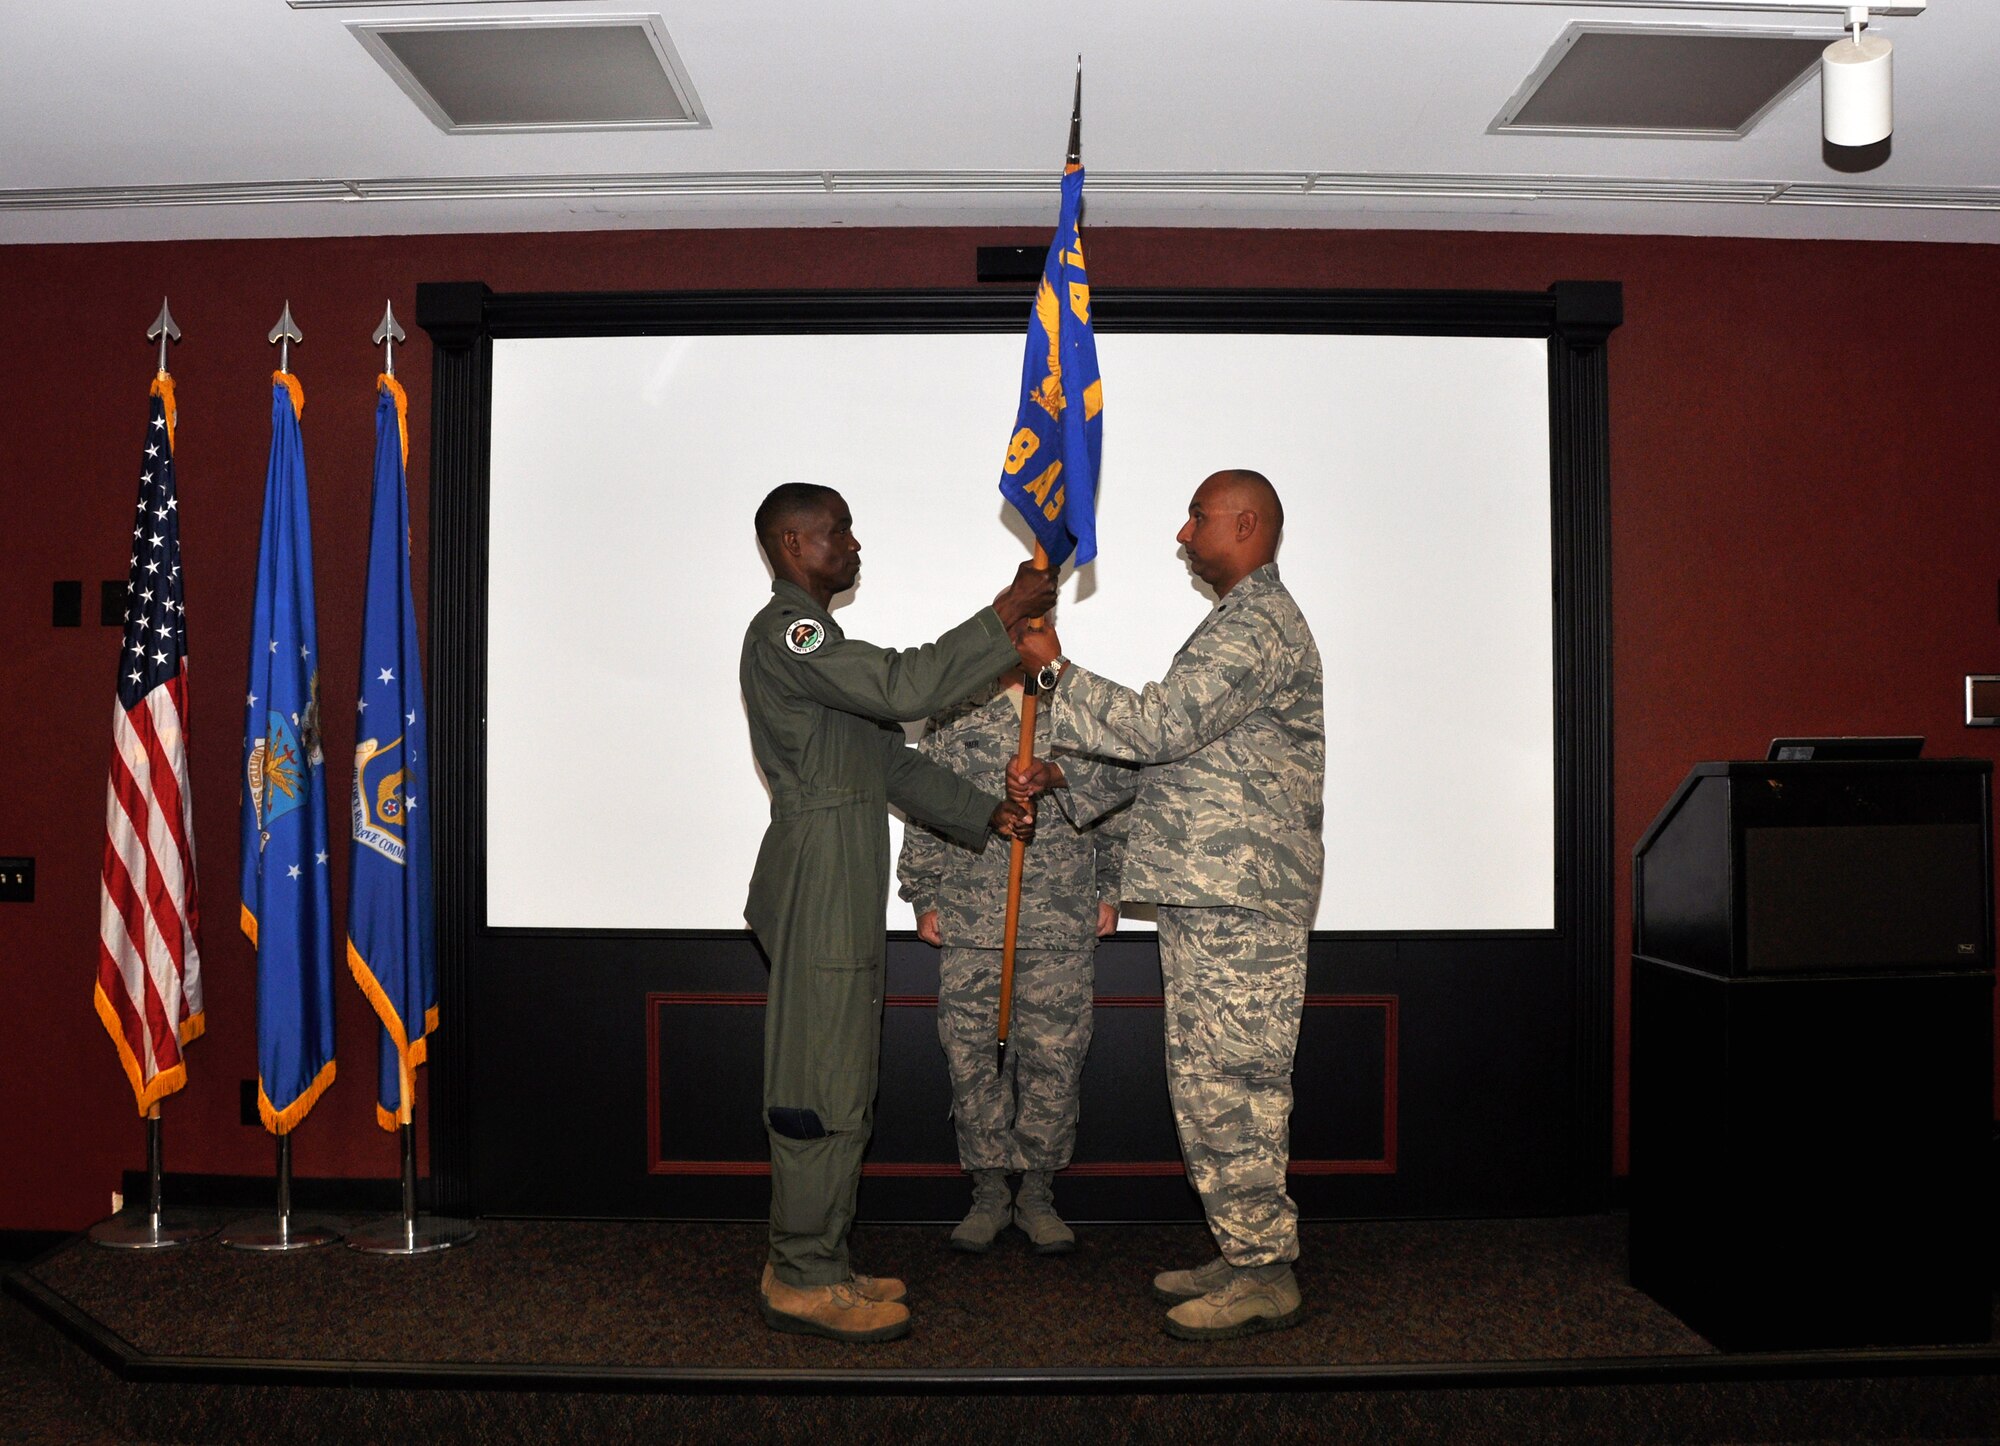 Lt. Col. Lewell B. Skinner assumes command of the 914th Operation Support Squadron here, August 2, 2014. (U.S. Air Force photo by Staff Sgt. Stephanie Sawyer) 